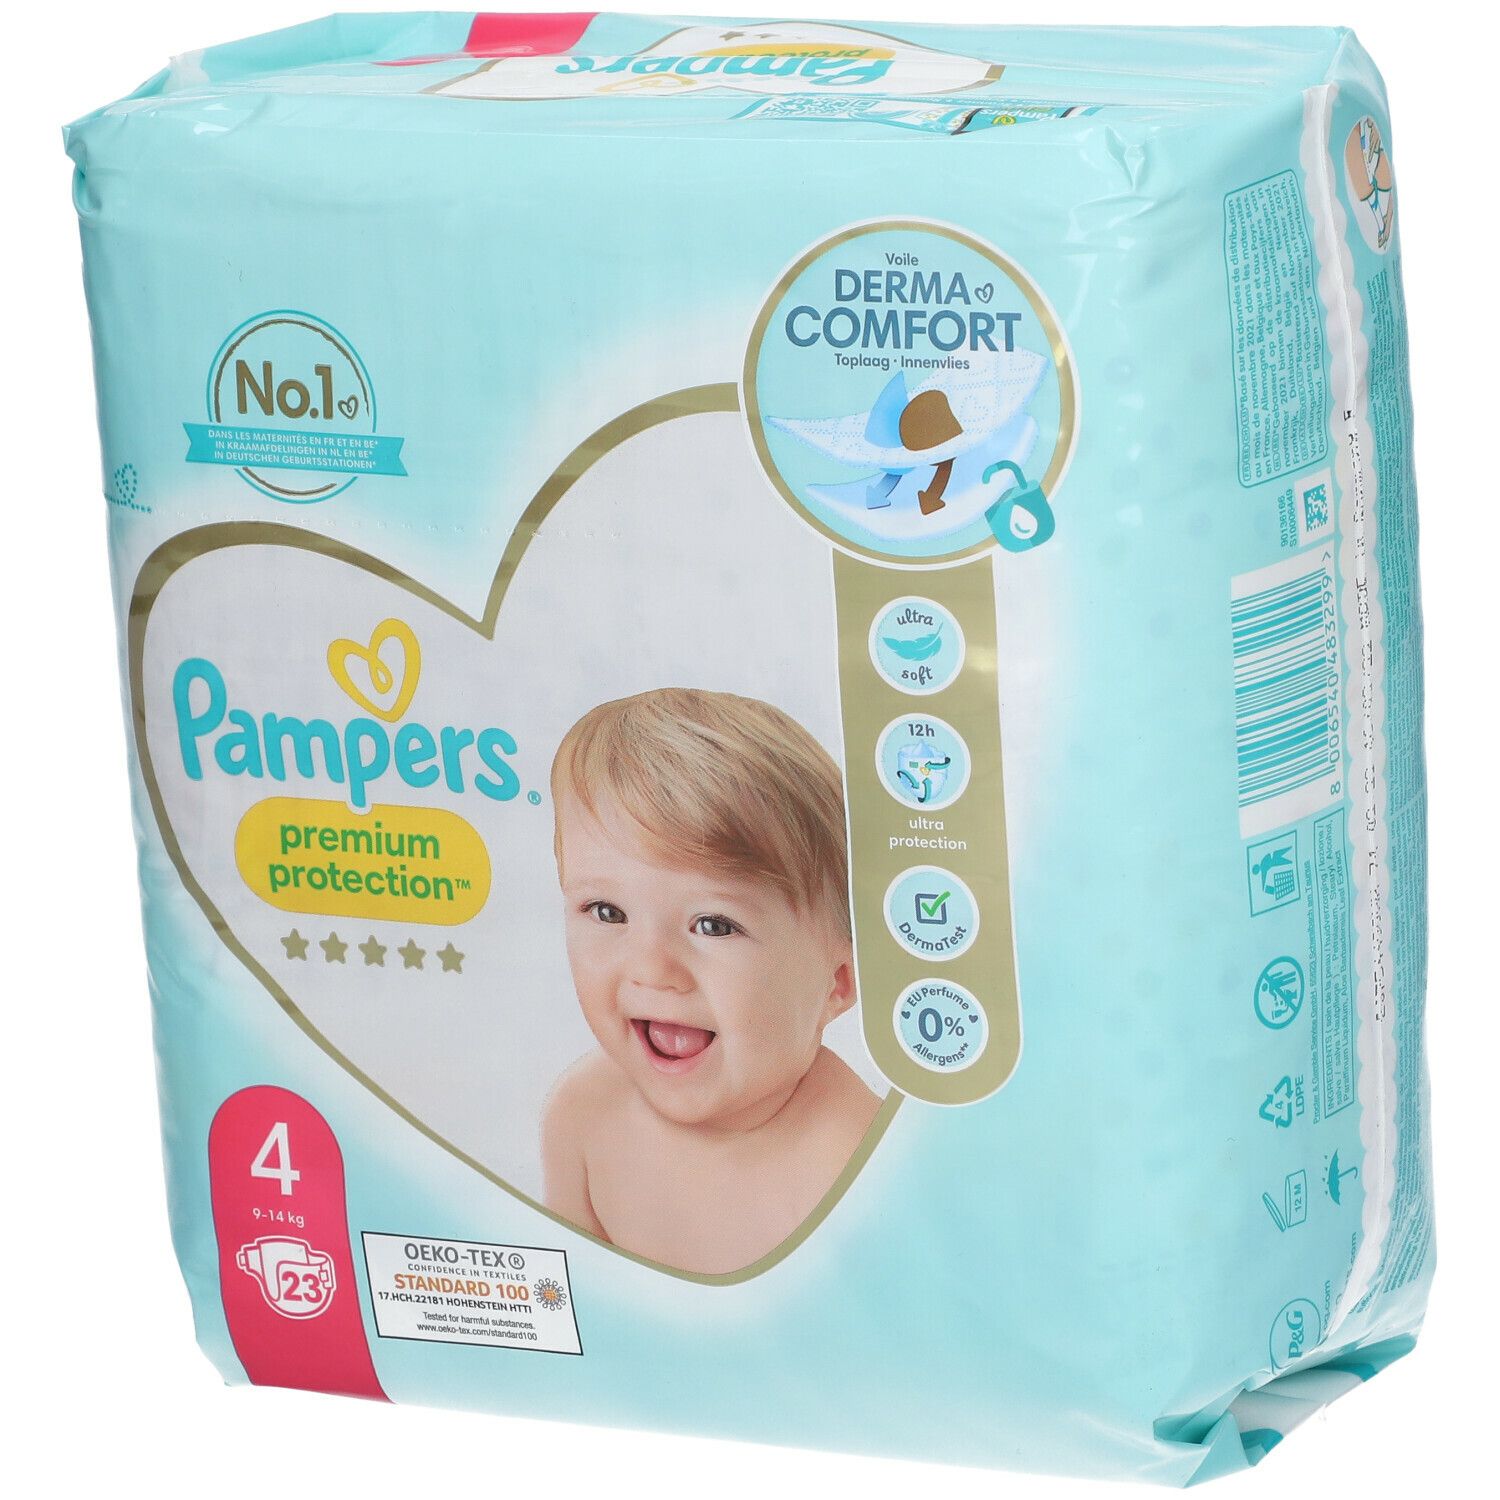 Pampers® Premium Protection™ Couche Taille 4, 9-14 kg 23 pc(s) Couches